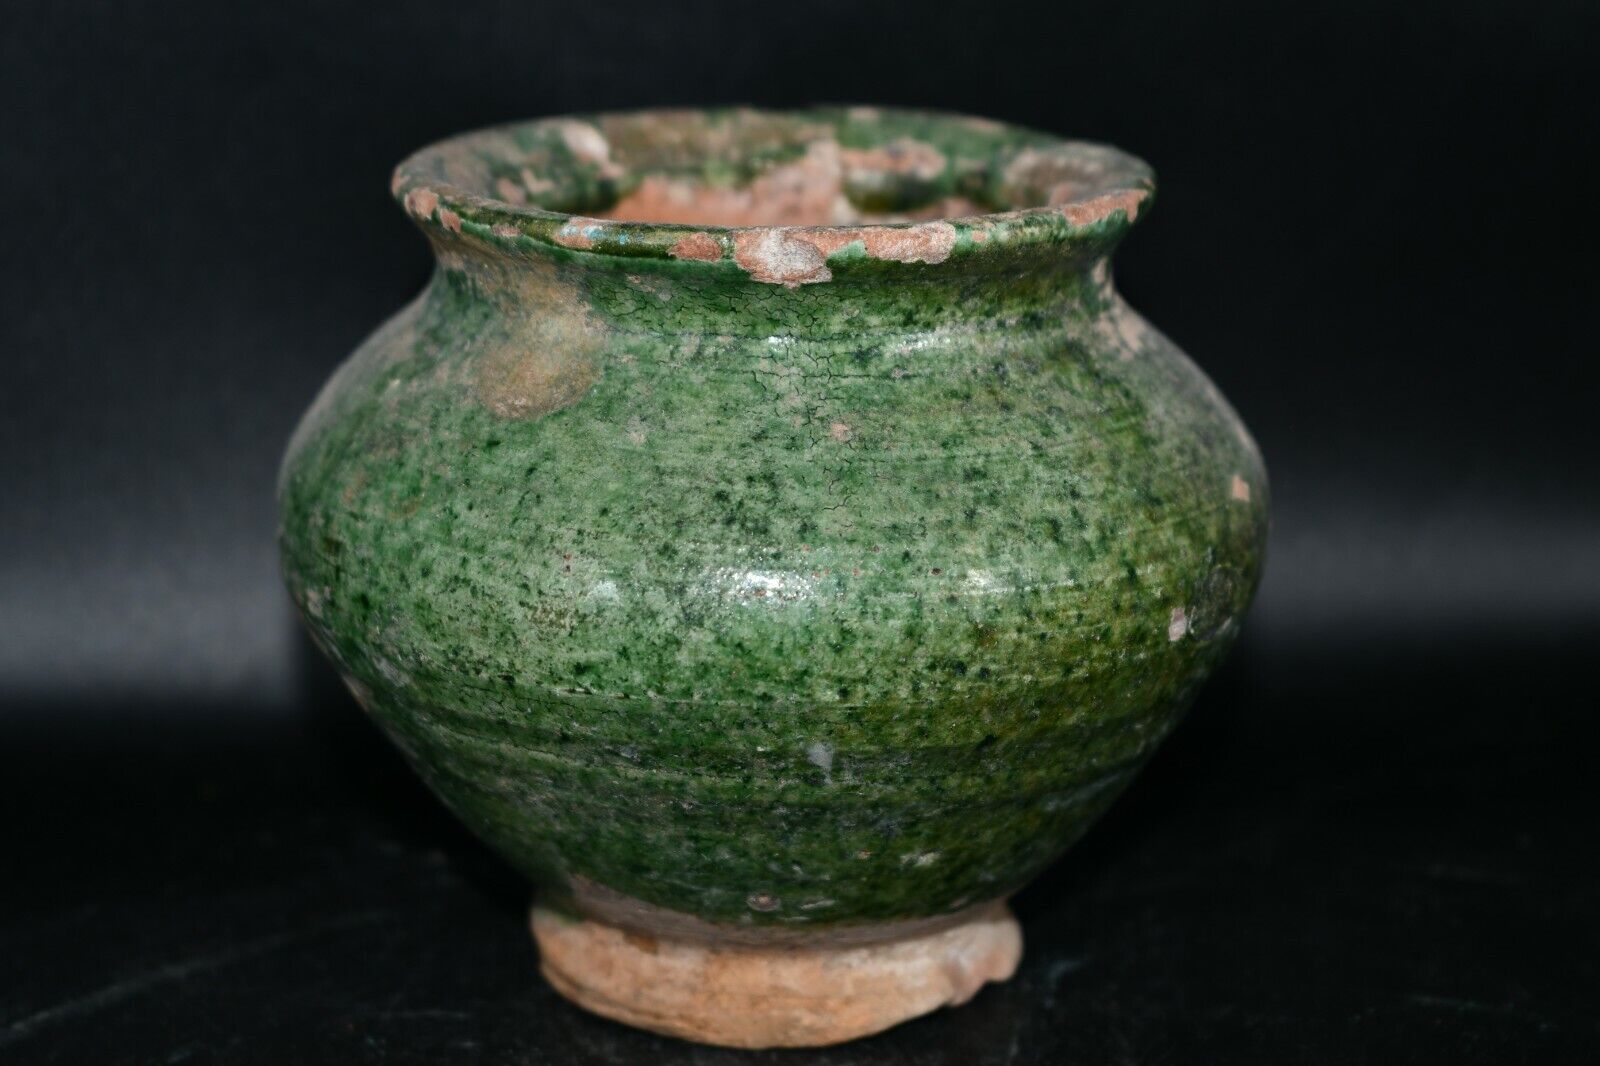 Genuine Ancient Islamic Ceramic Pot with Green Glazed Color In Good Condition